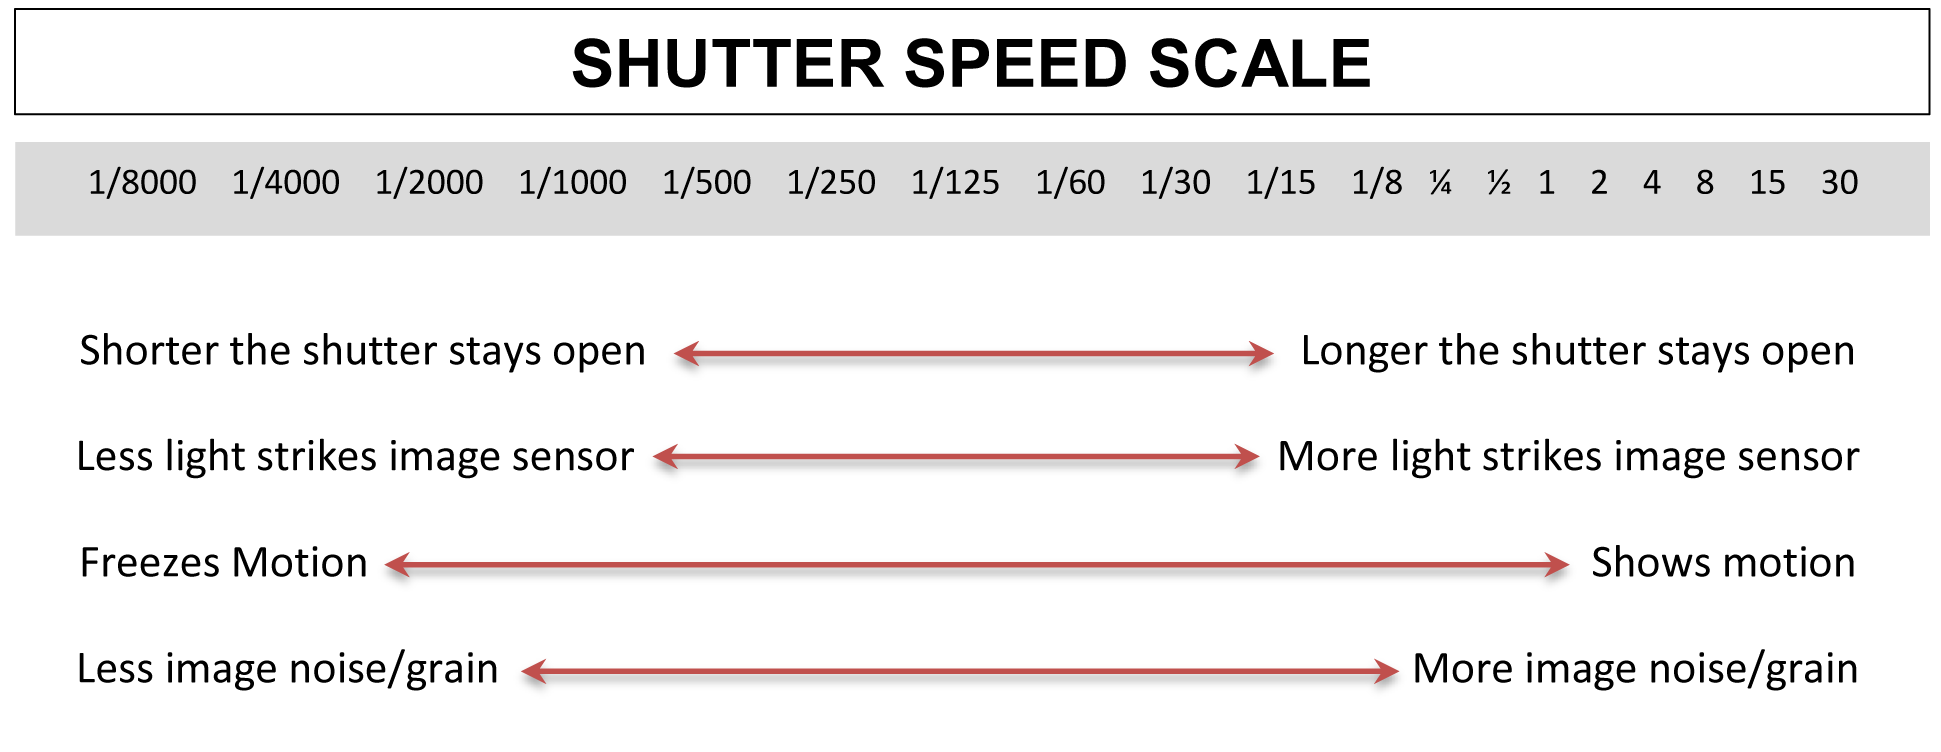 Image result for shutter speed scale